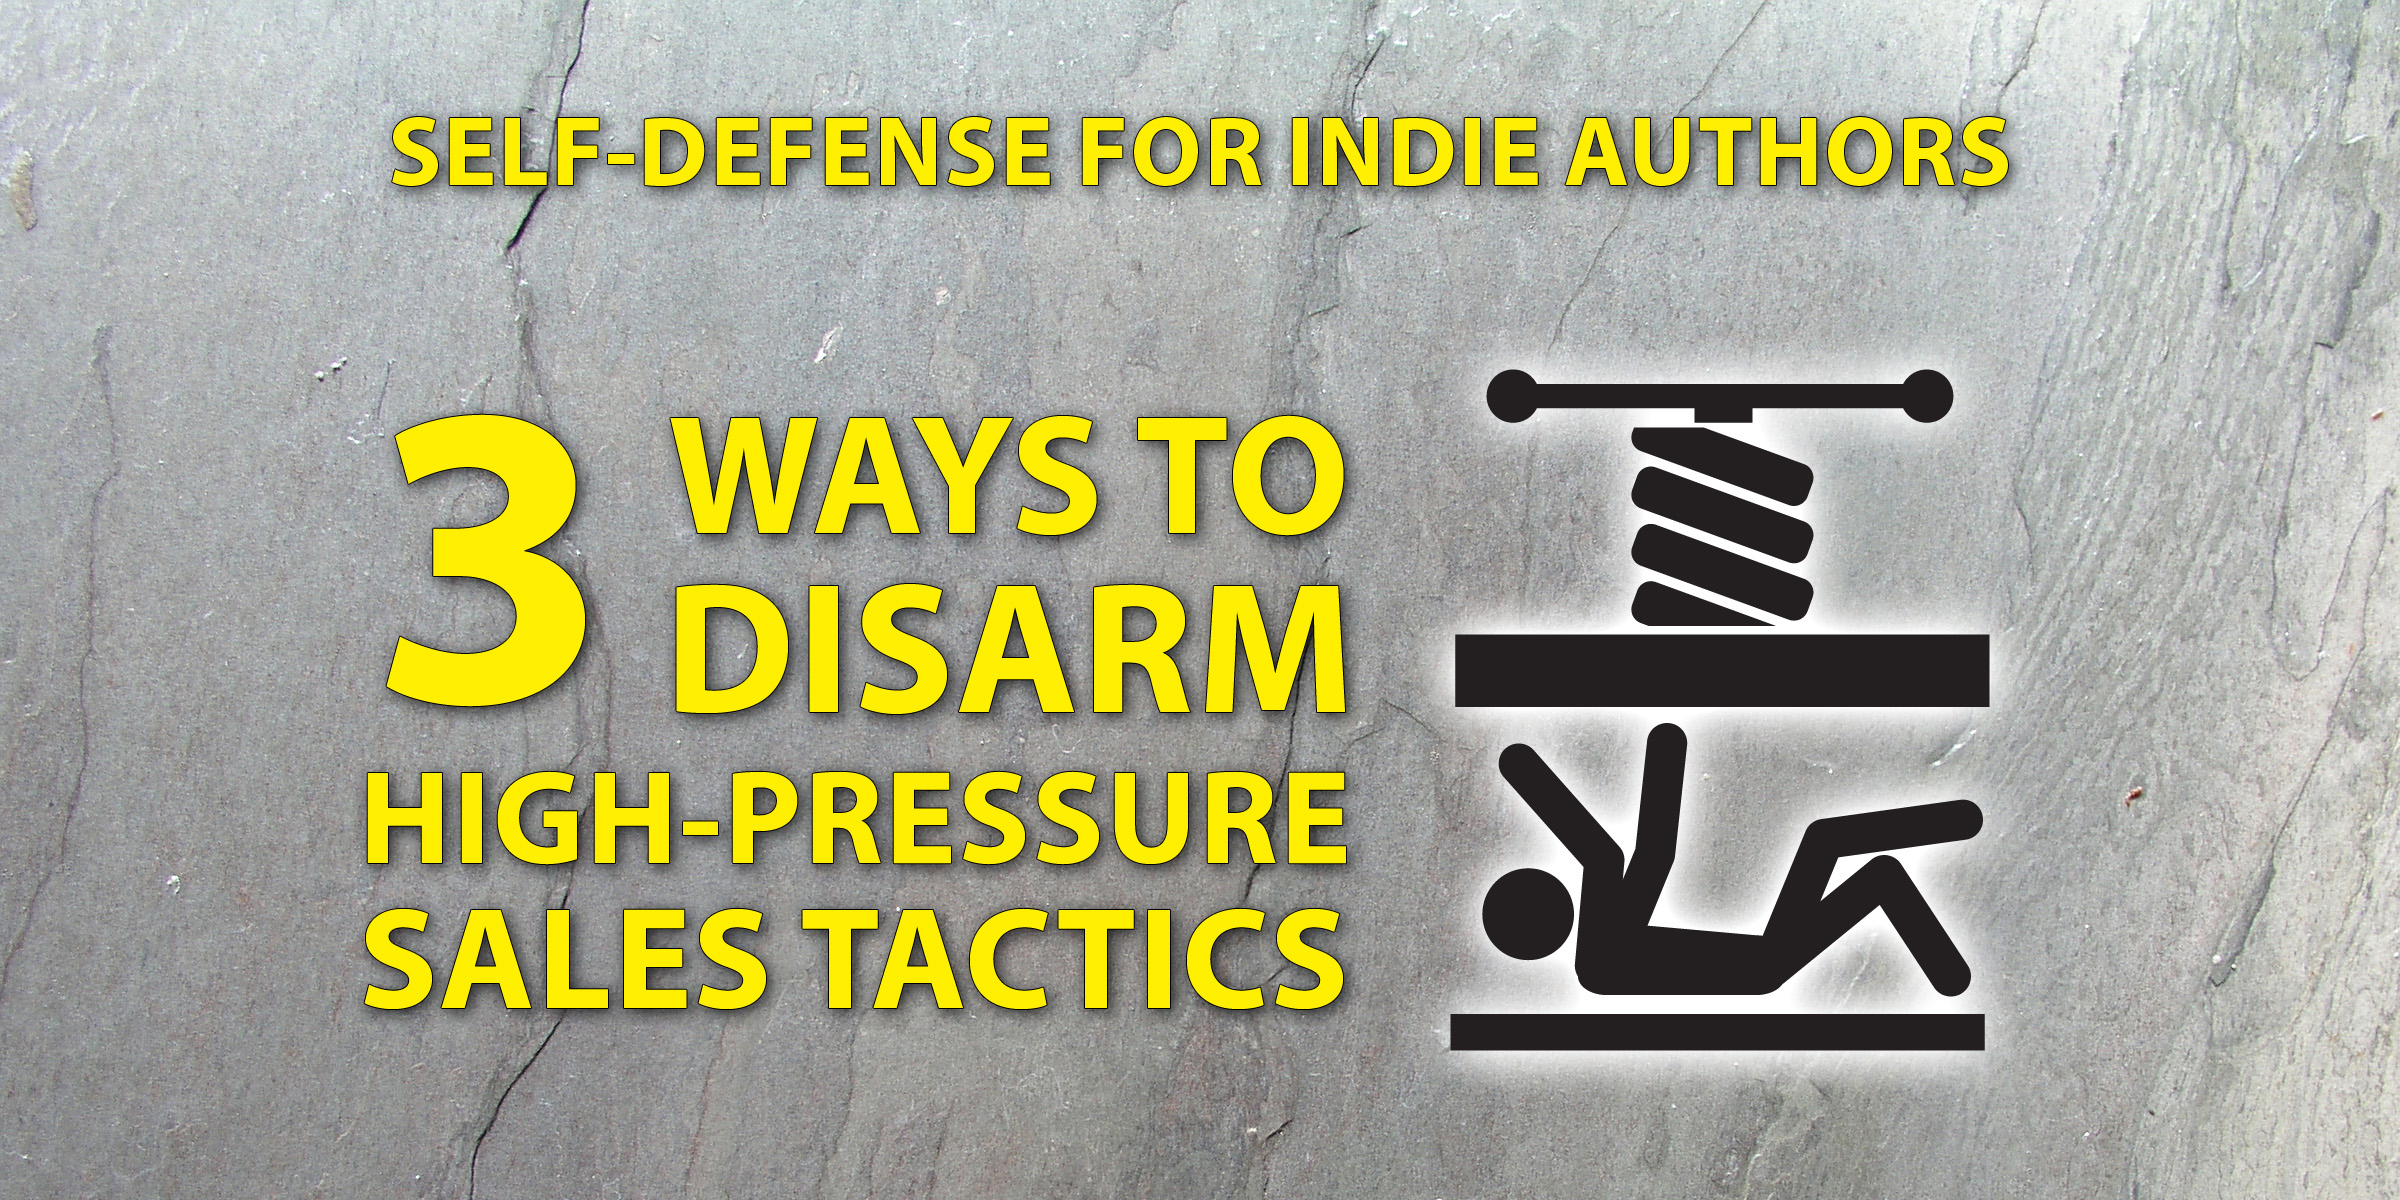 Disarming A High-Pressure Seller (Self-Defense For Indie Authors #1)